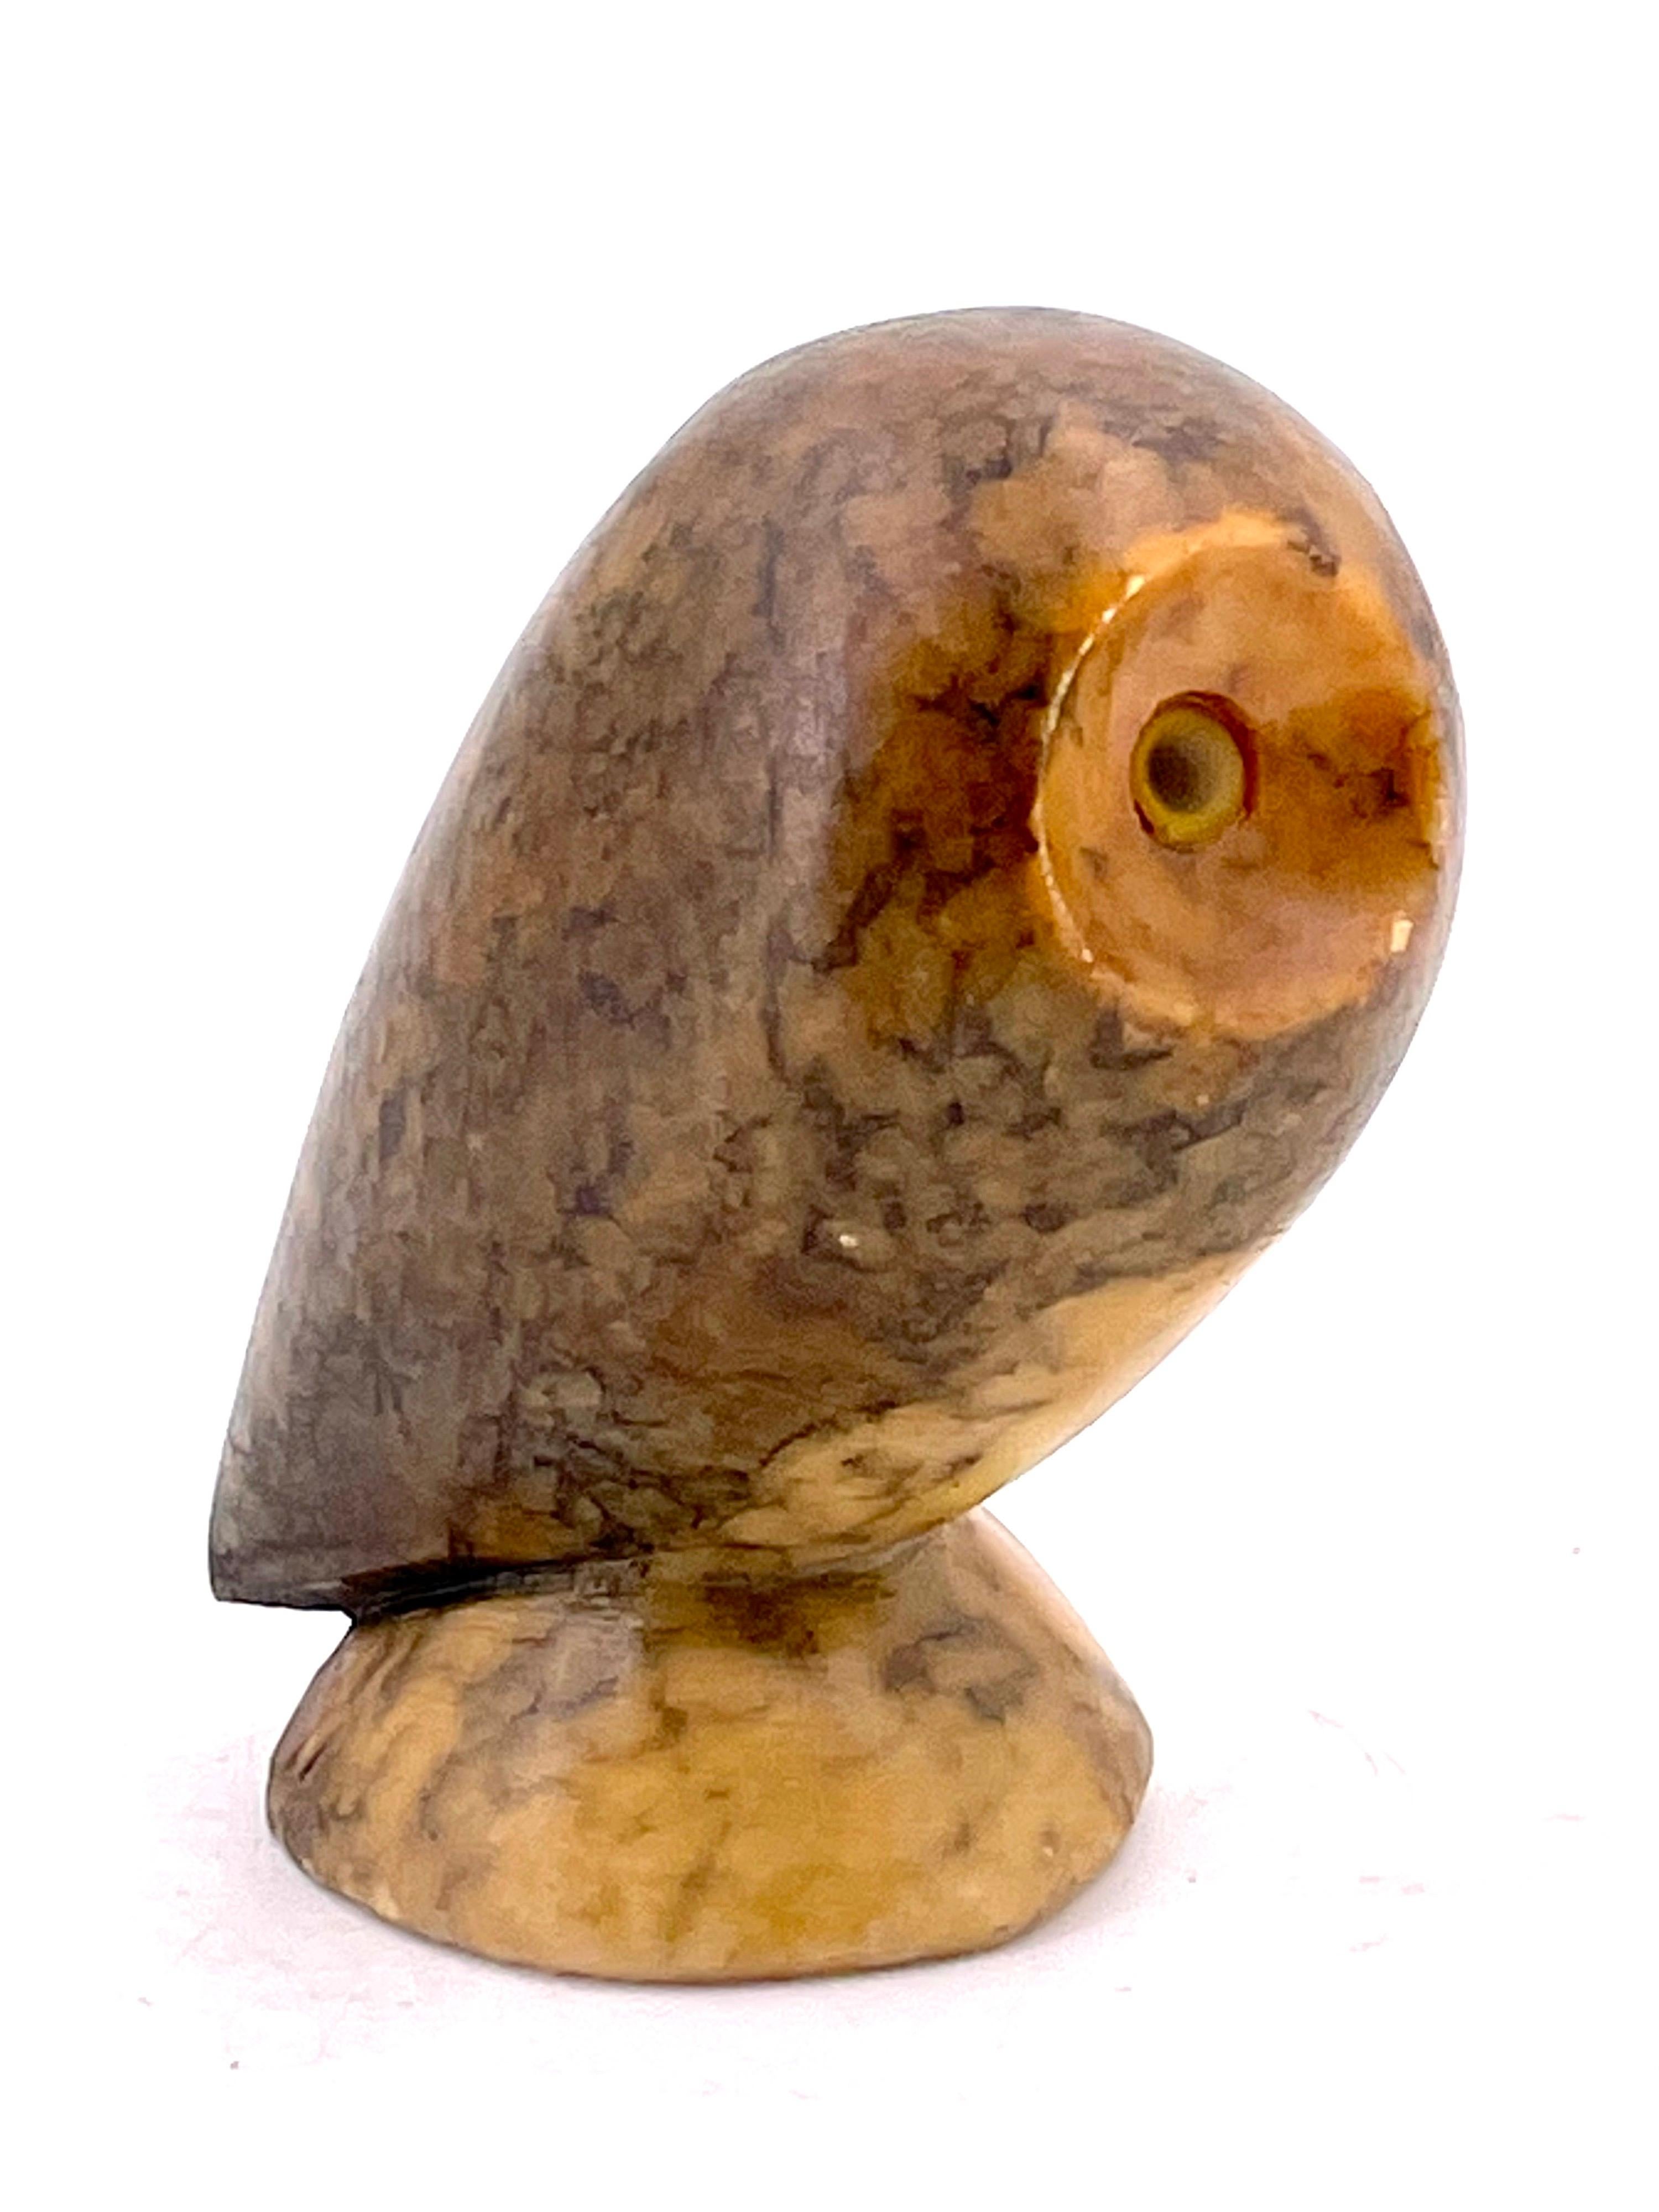 Whimsical rare petite sculpture paperweight in alabaster very collectible made in Italy, circa 1960s, retains label as shown Made in Italy.